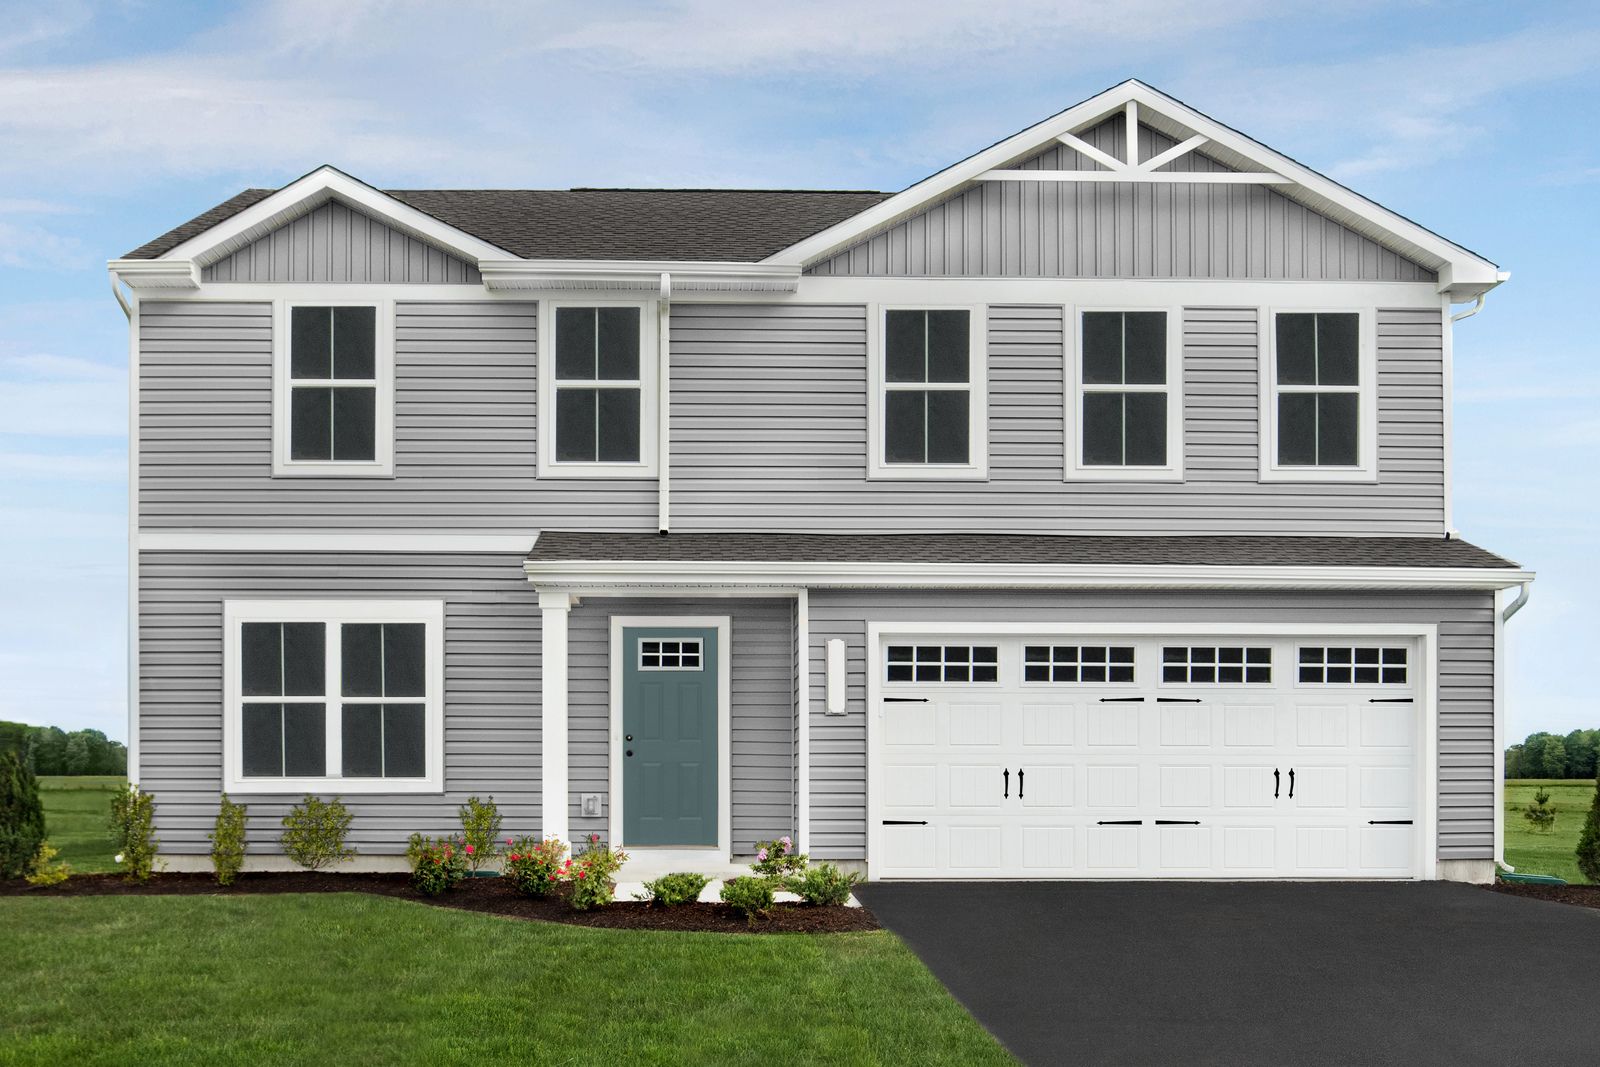 Summerfield: BRAND NEW HOMES WITH ALL APPLIANCES INCLUDED - Upper $200s